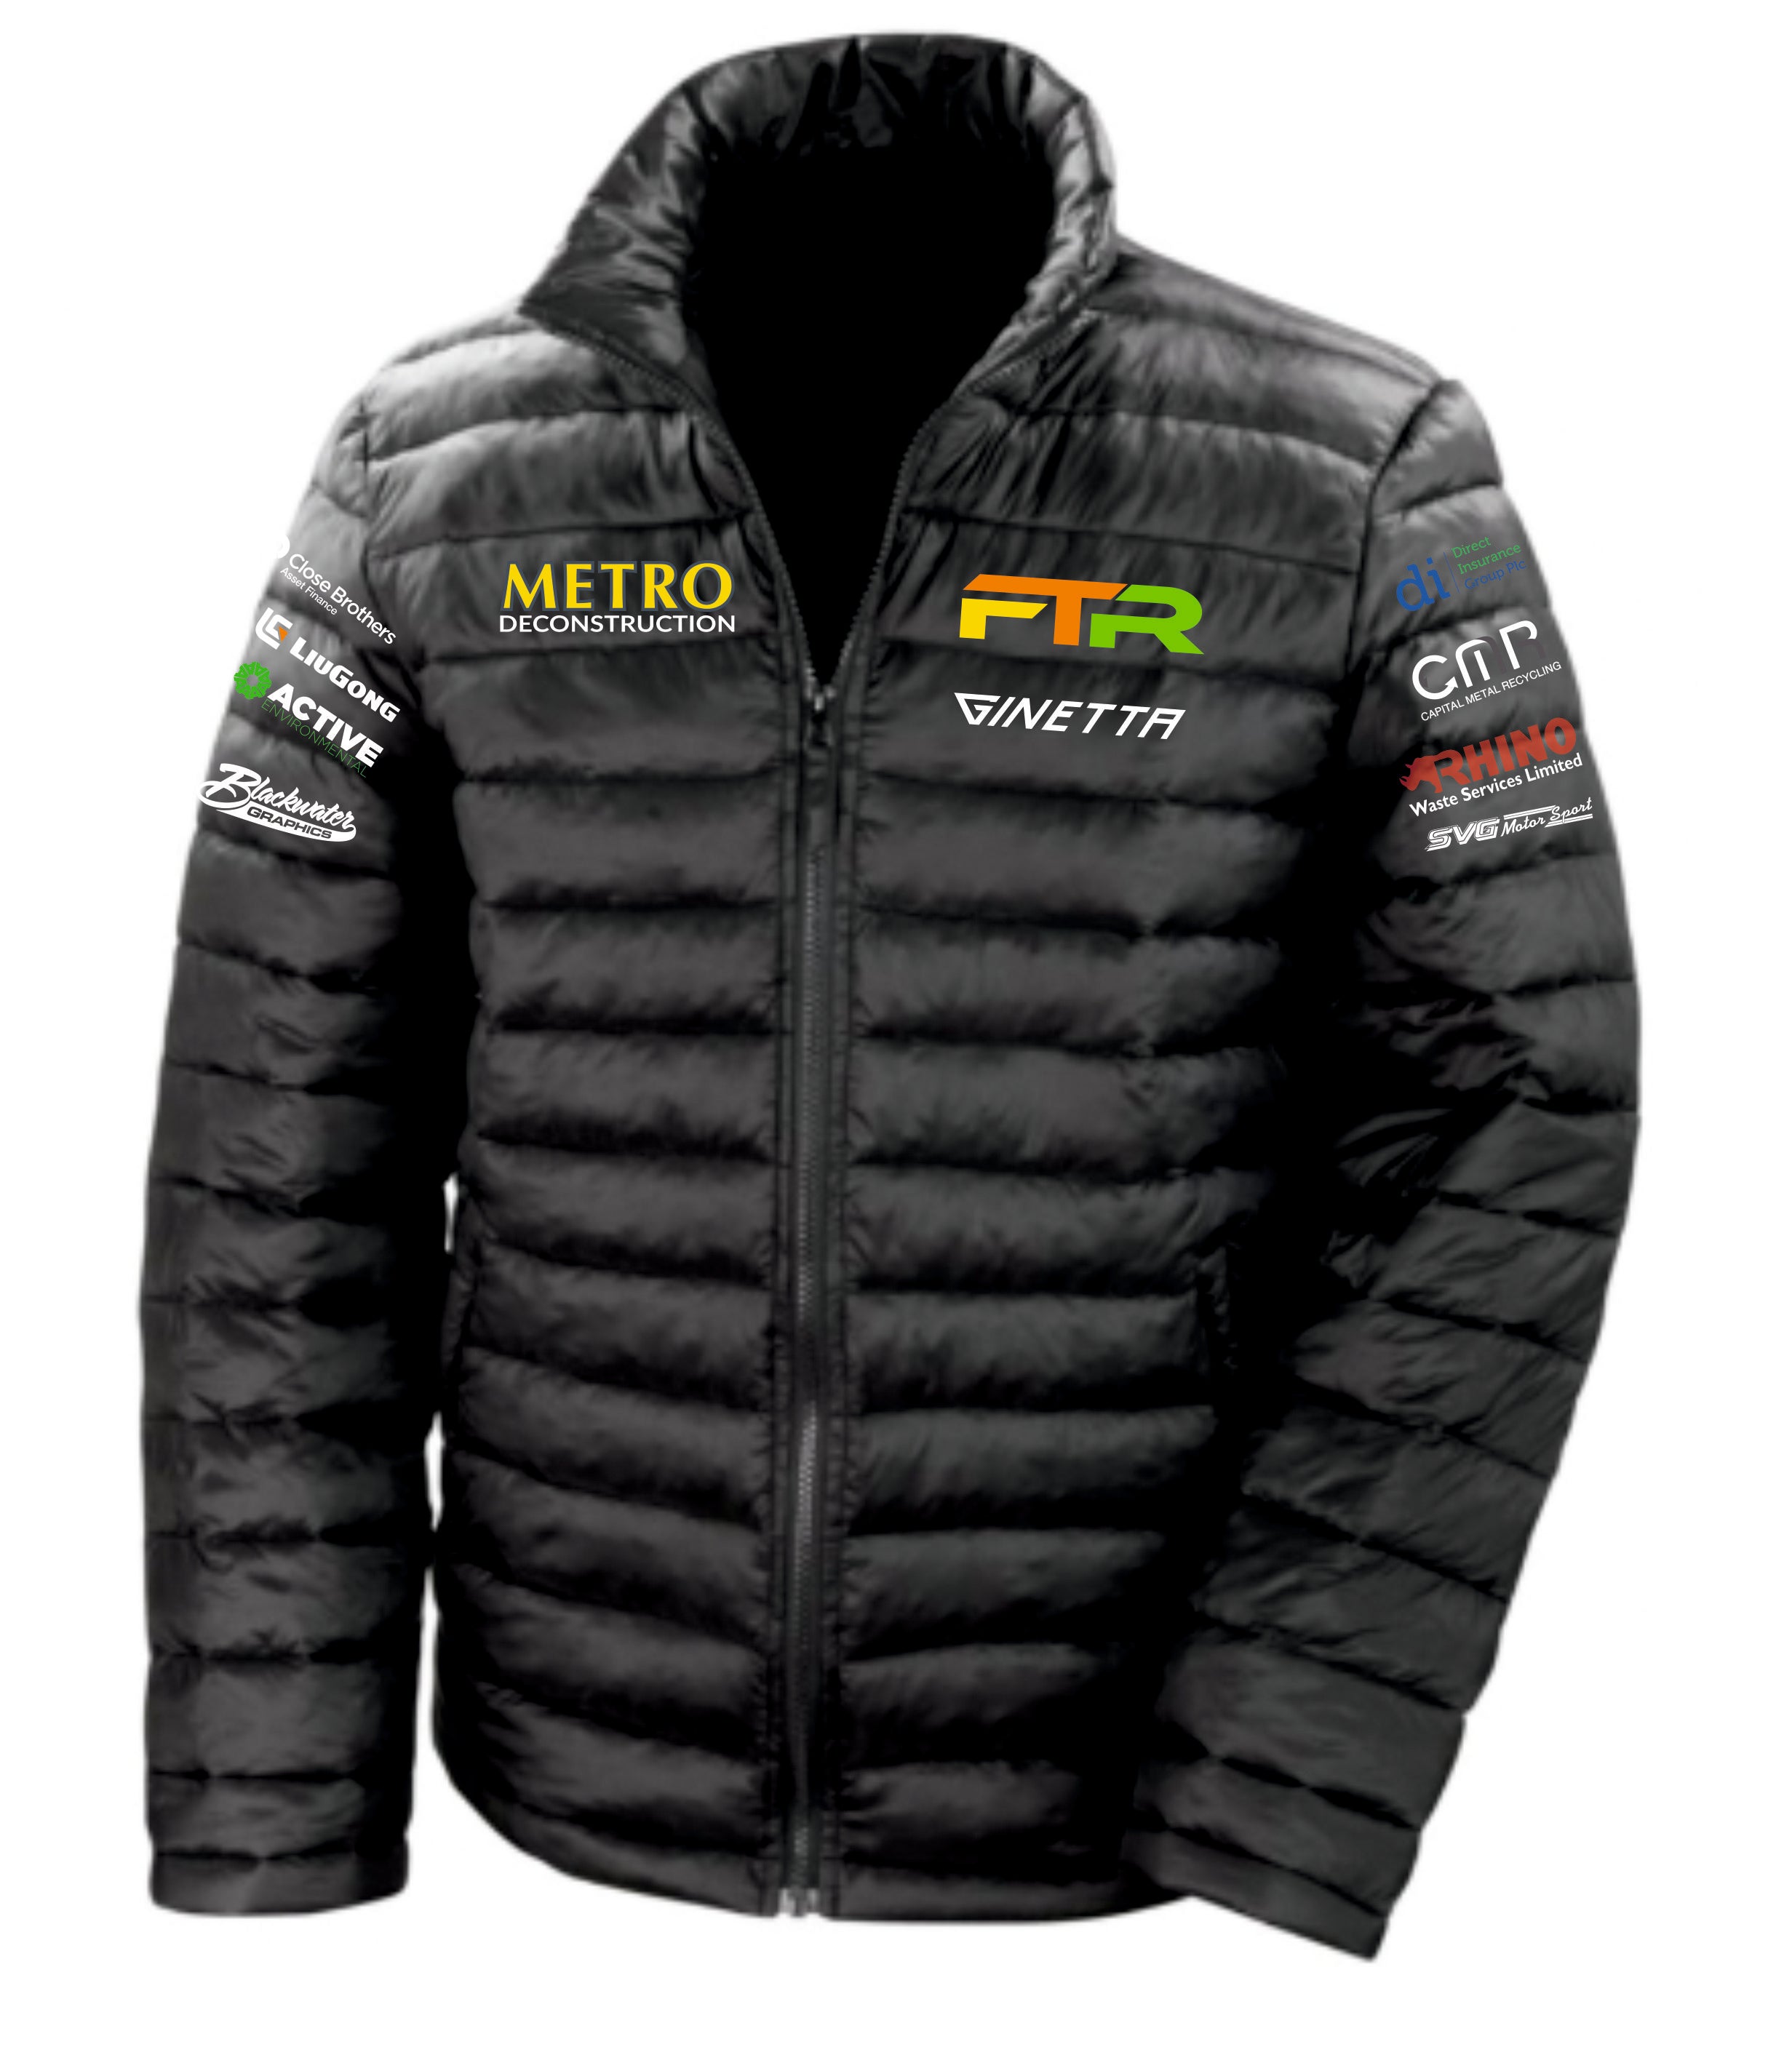 Frankie Taylor Racing Padded Jacket (non-hooded)